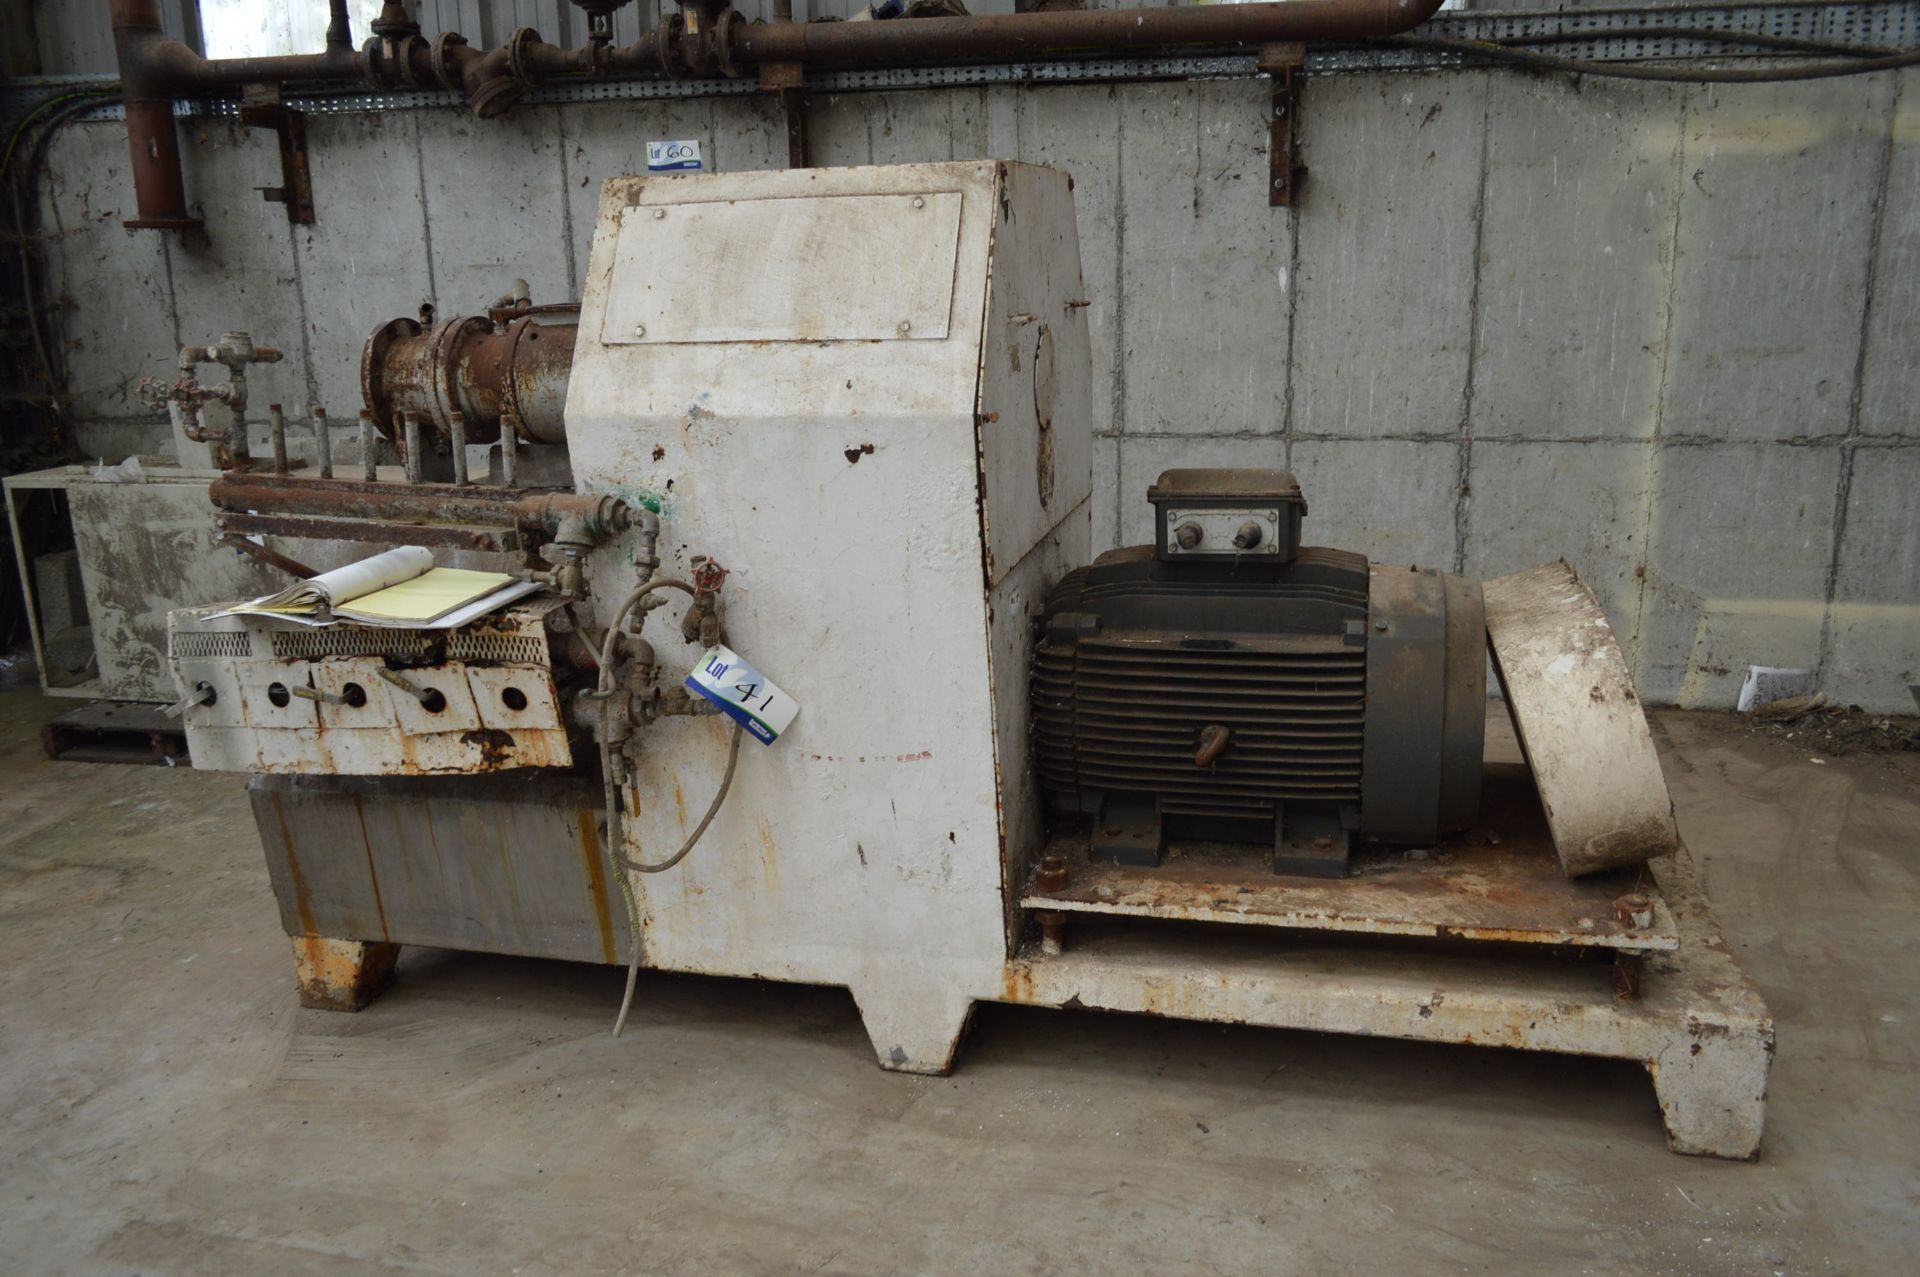 Wenger EXTRUDER, serial no. 8312-8693, with Weg 55kW electric motor and equipment on two pallets